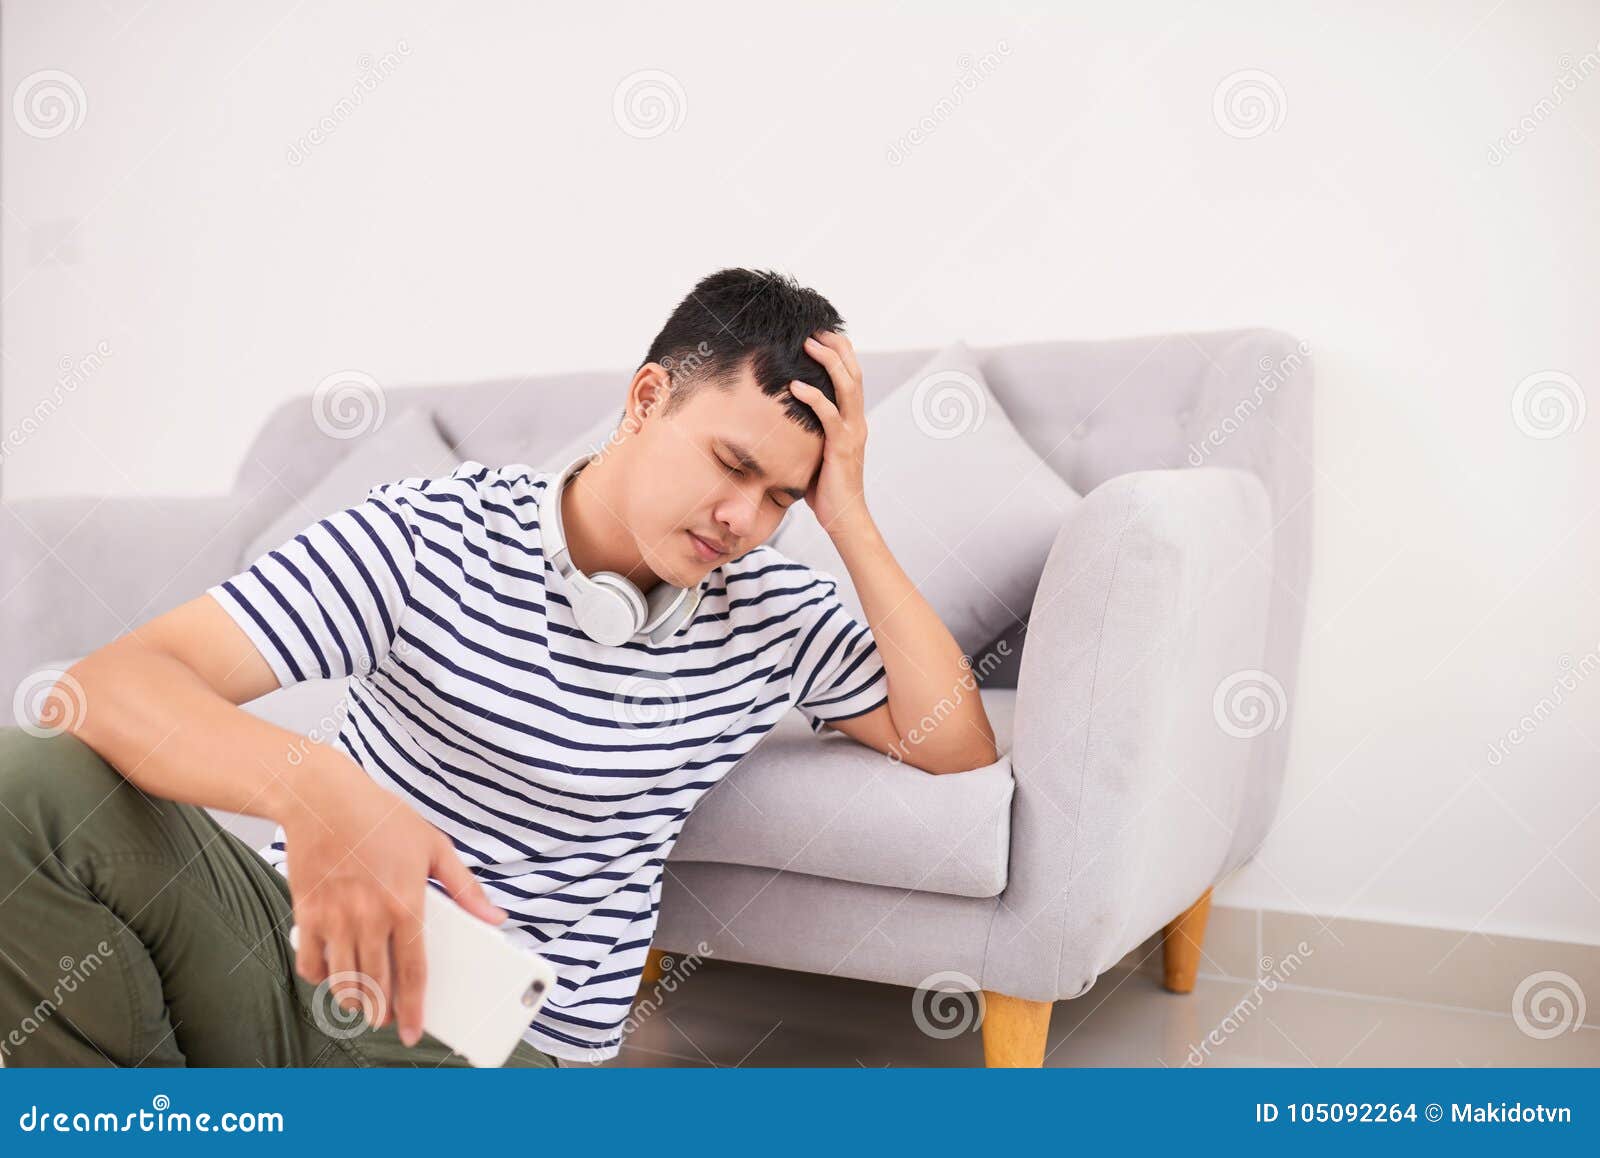 Despaired Young Man Sitting On Floor Holding Smartphone Stock Photo Image Of Sitting Young